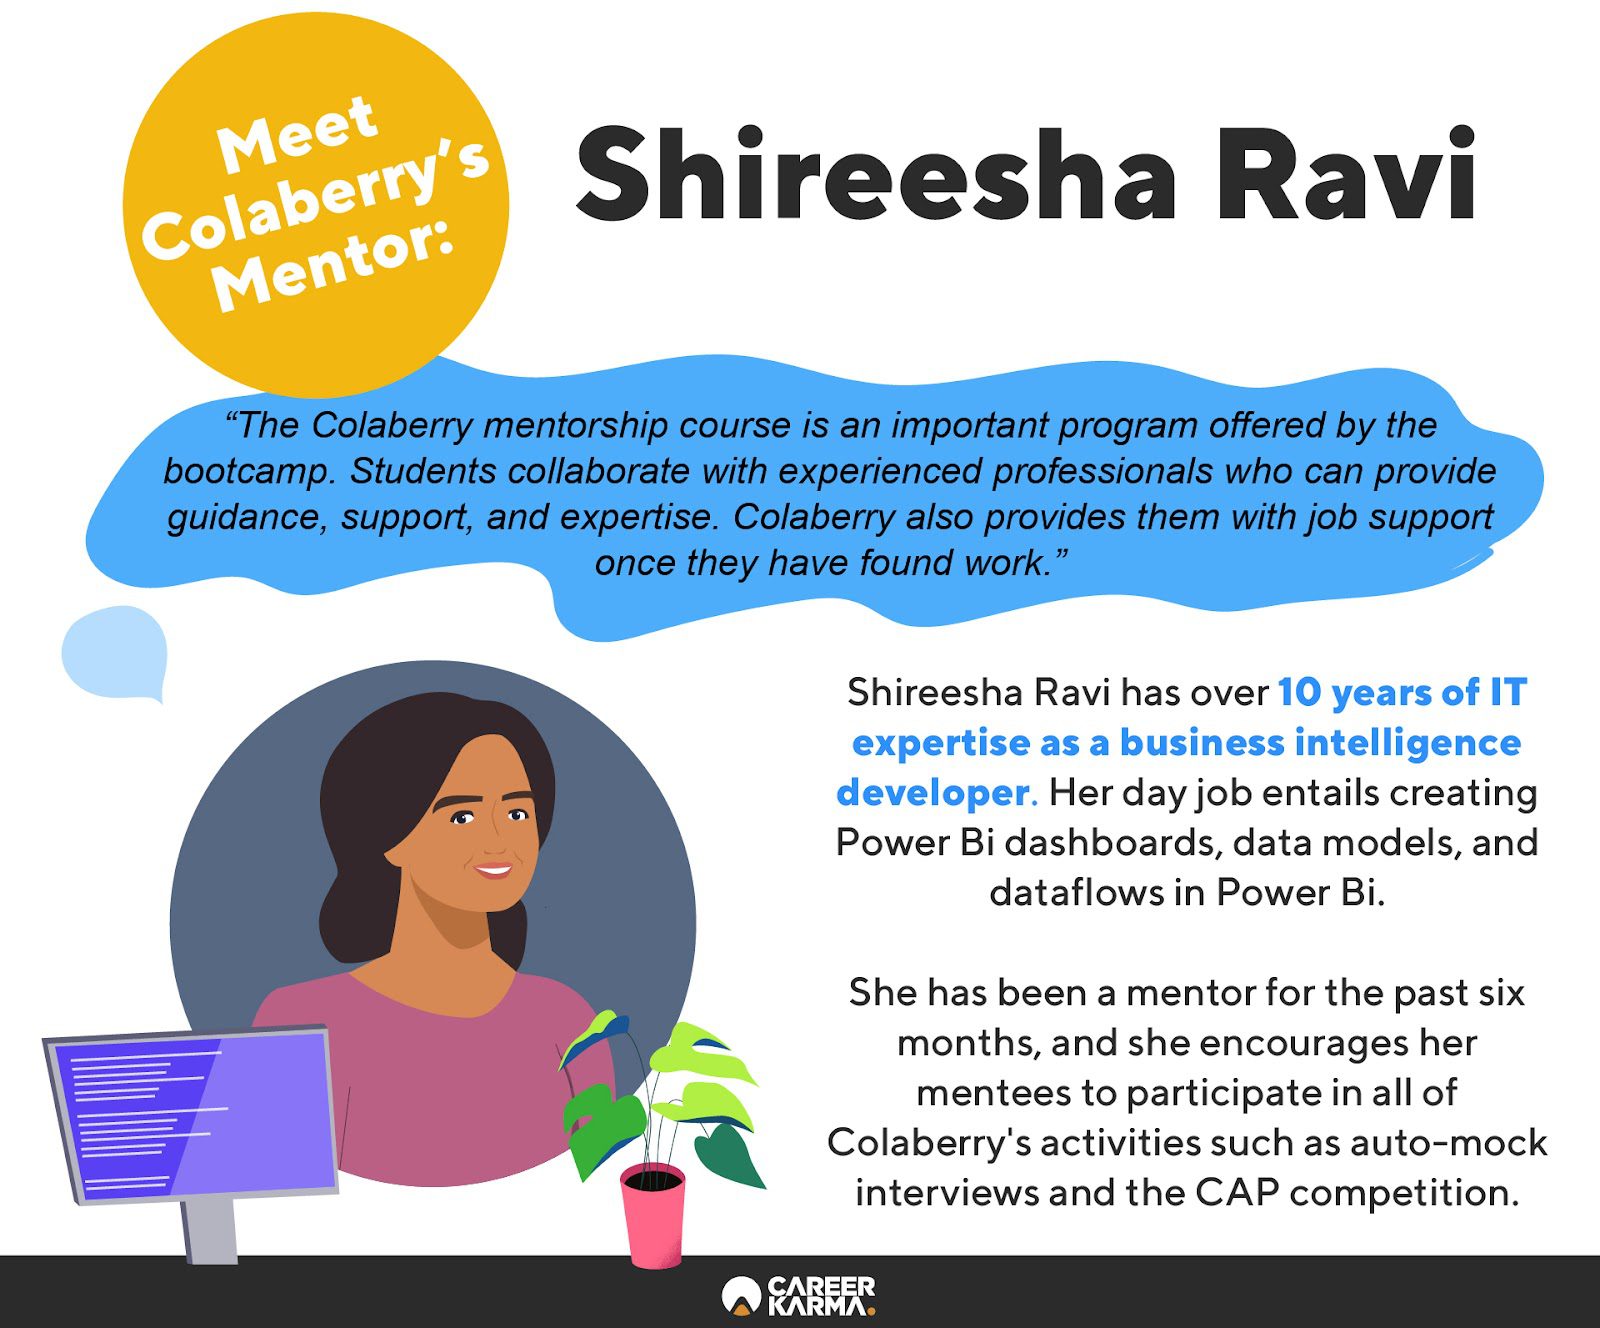 An infographic featuring Colaberry mentor Shireesha Ravi